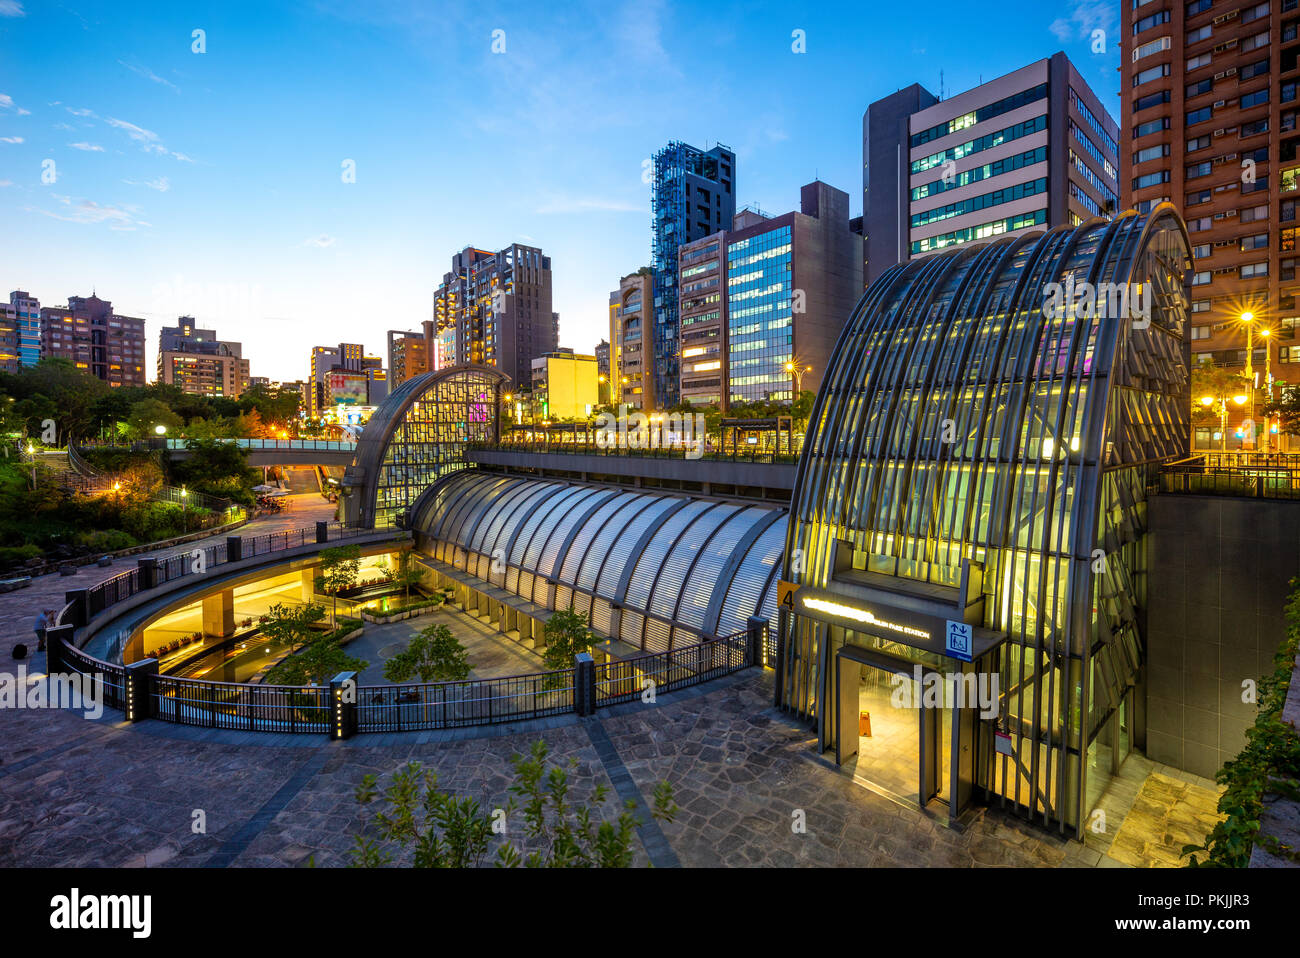 night view of daan park station in taipei Stock Photo